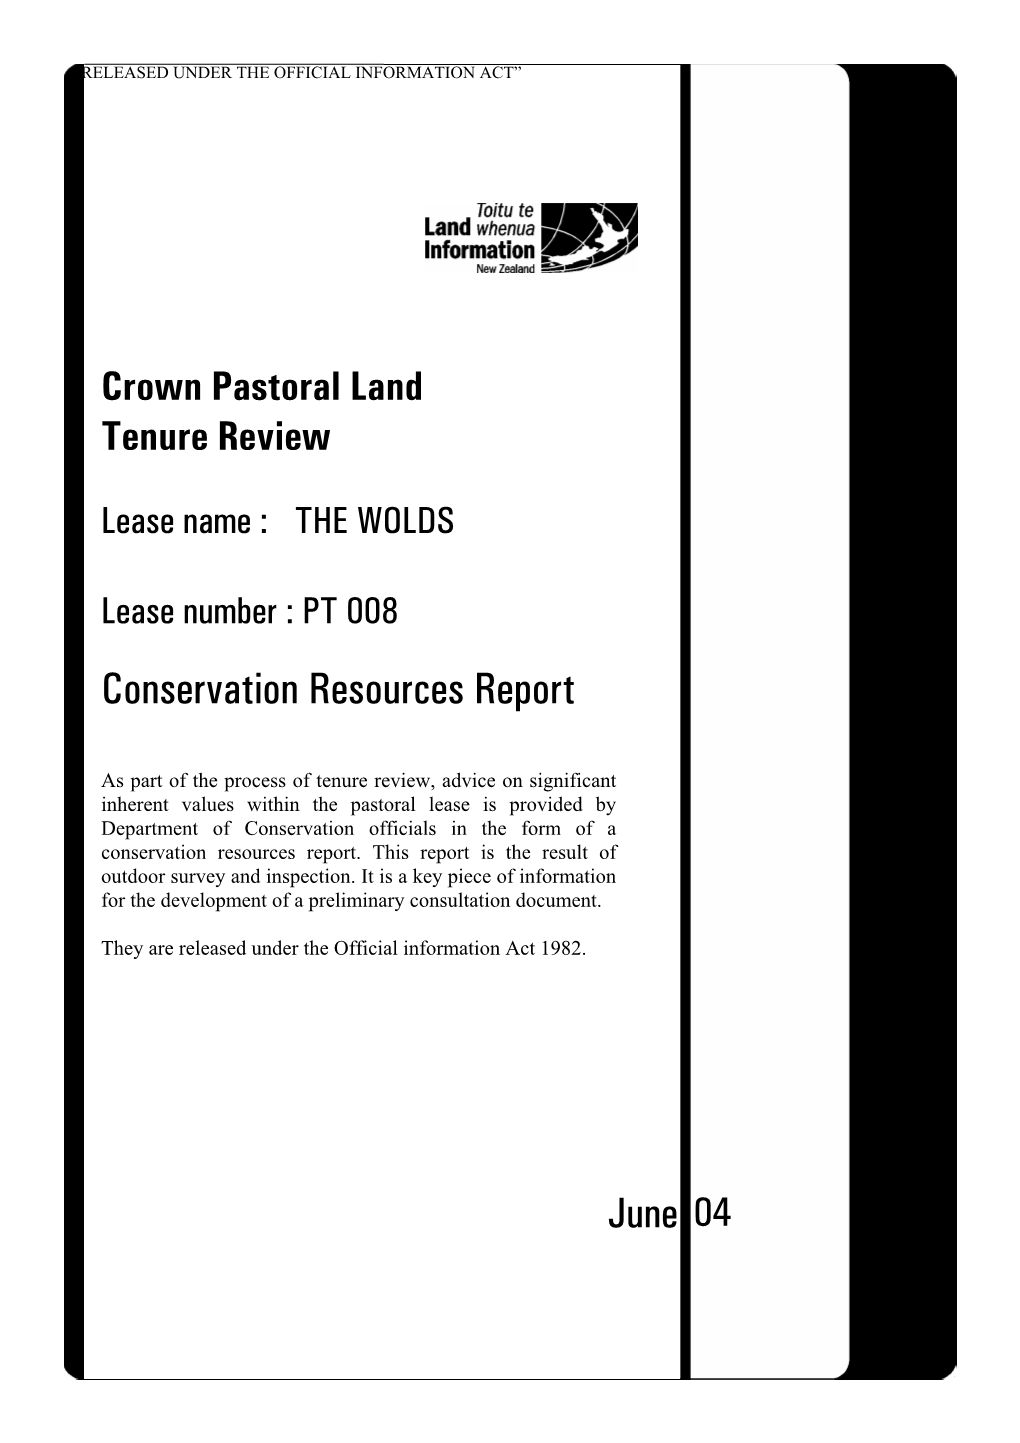 Conservation Resources Report